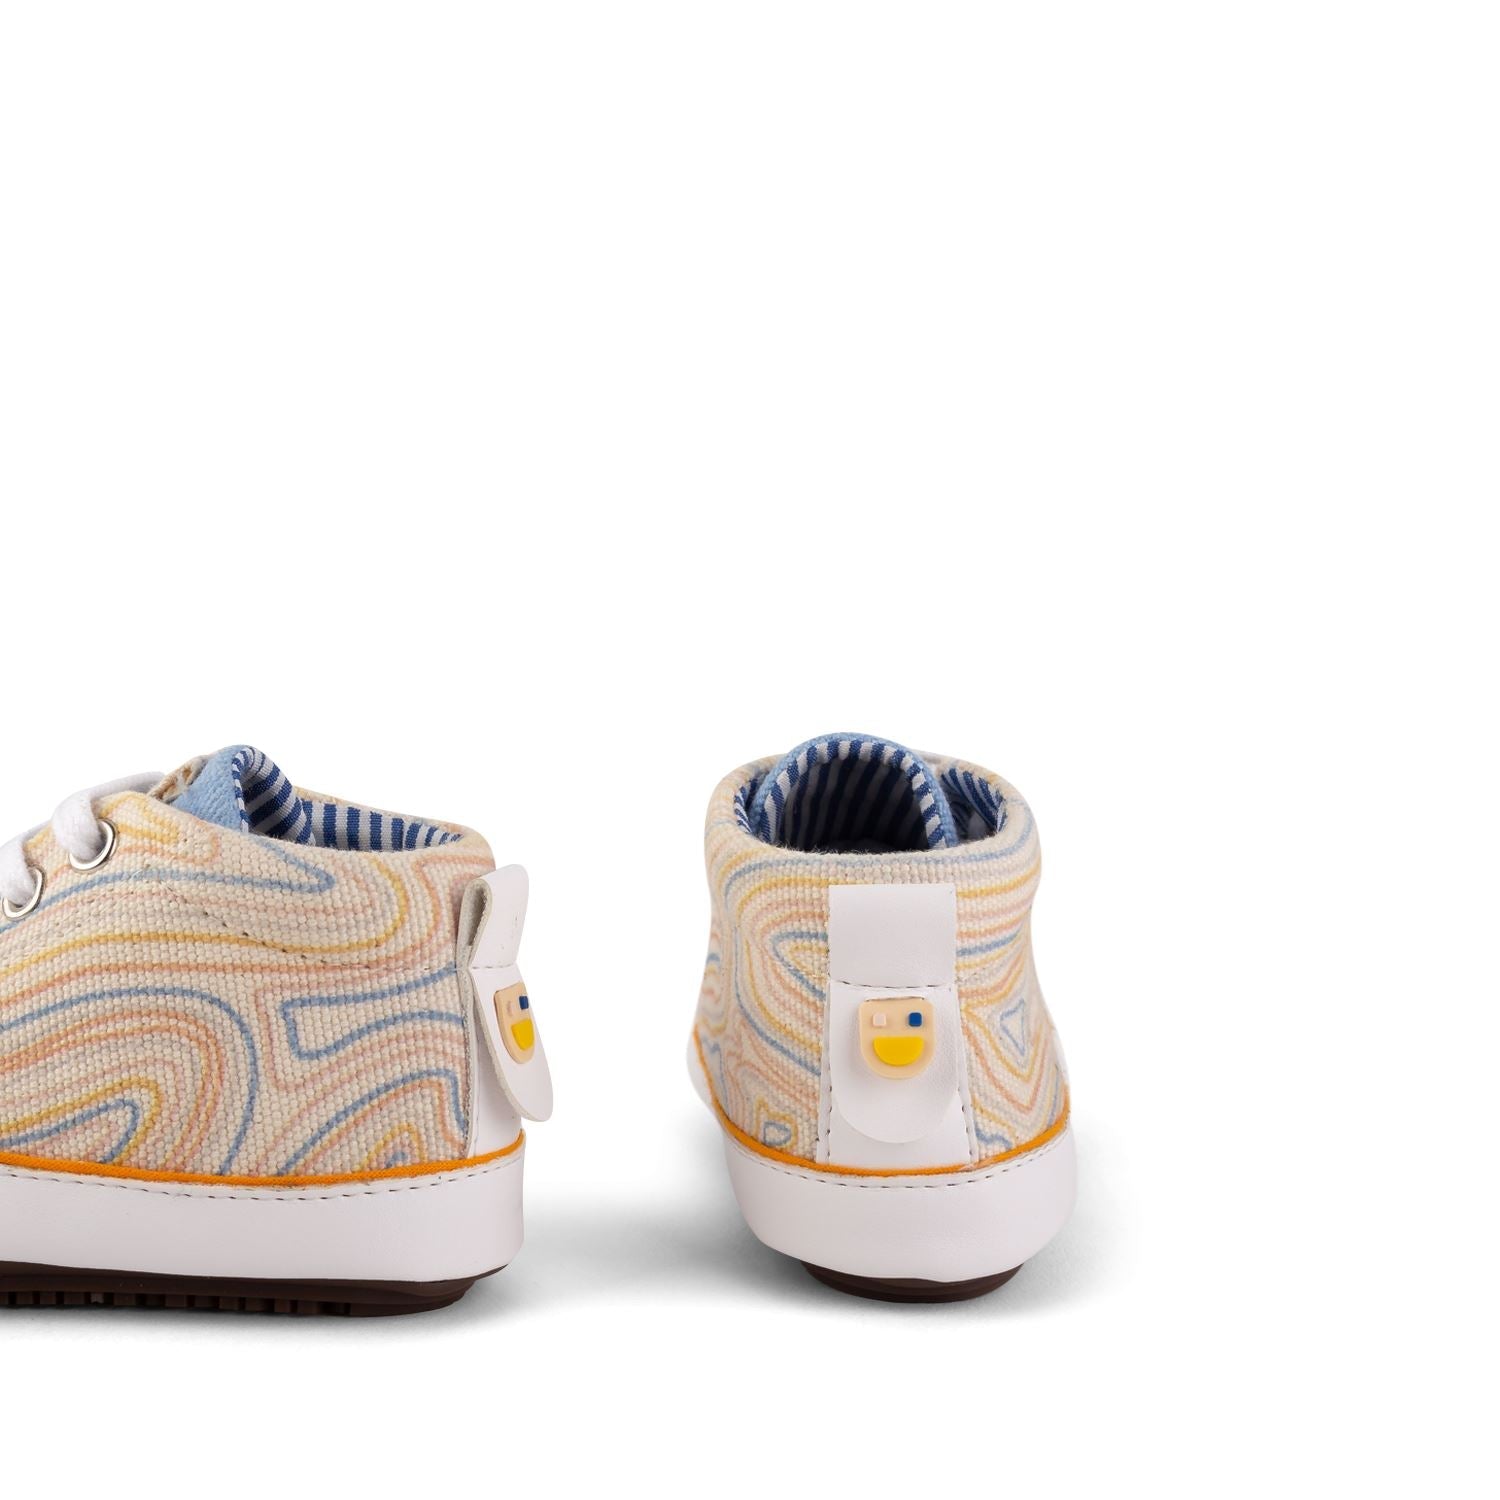 Cream/Blue Eco sneaker Booties Shoes & Booties Dulis Shoes 